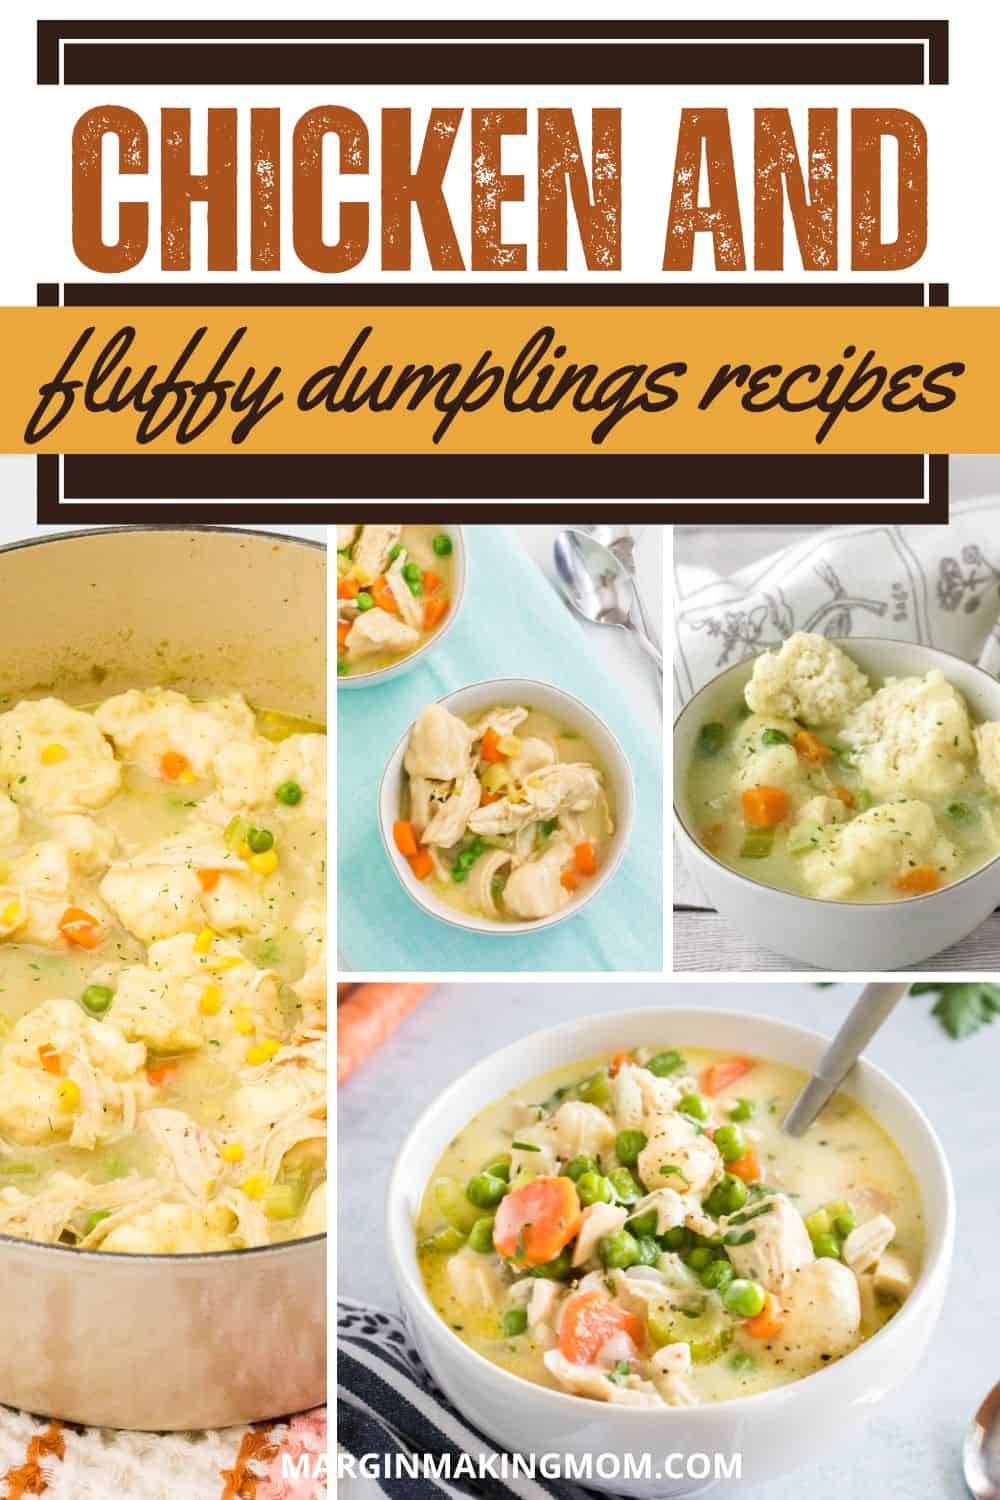 collage image featuring photos of chicken and fluffy dumplings, including those made with Bisquick, Jiffy mix, and biscuit dough.